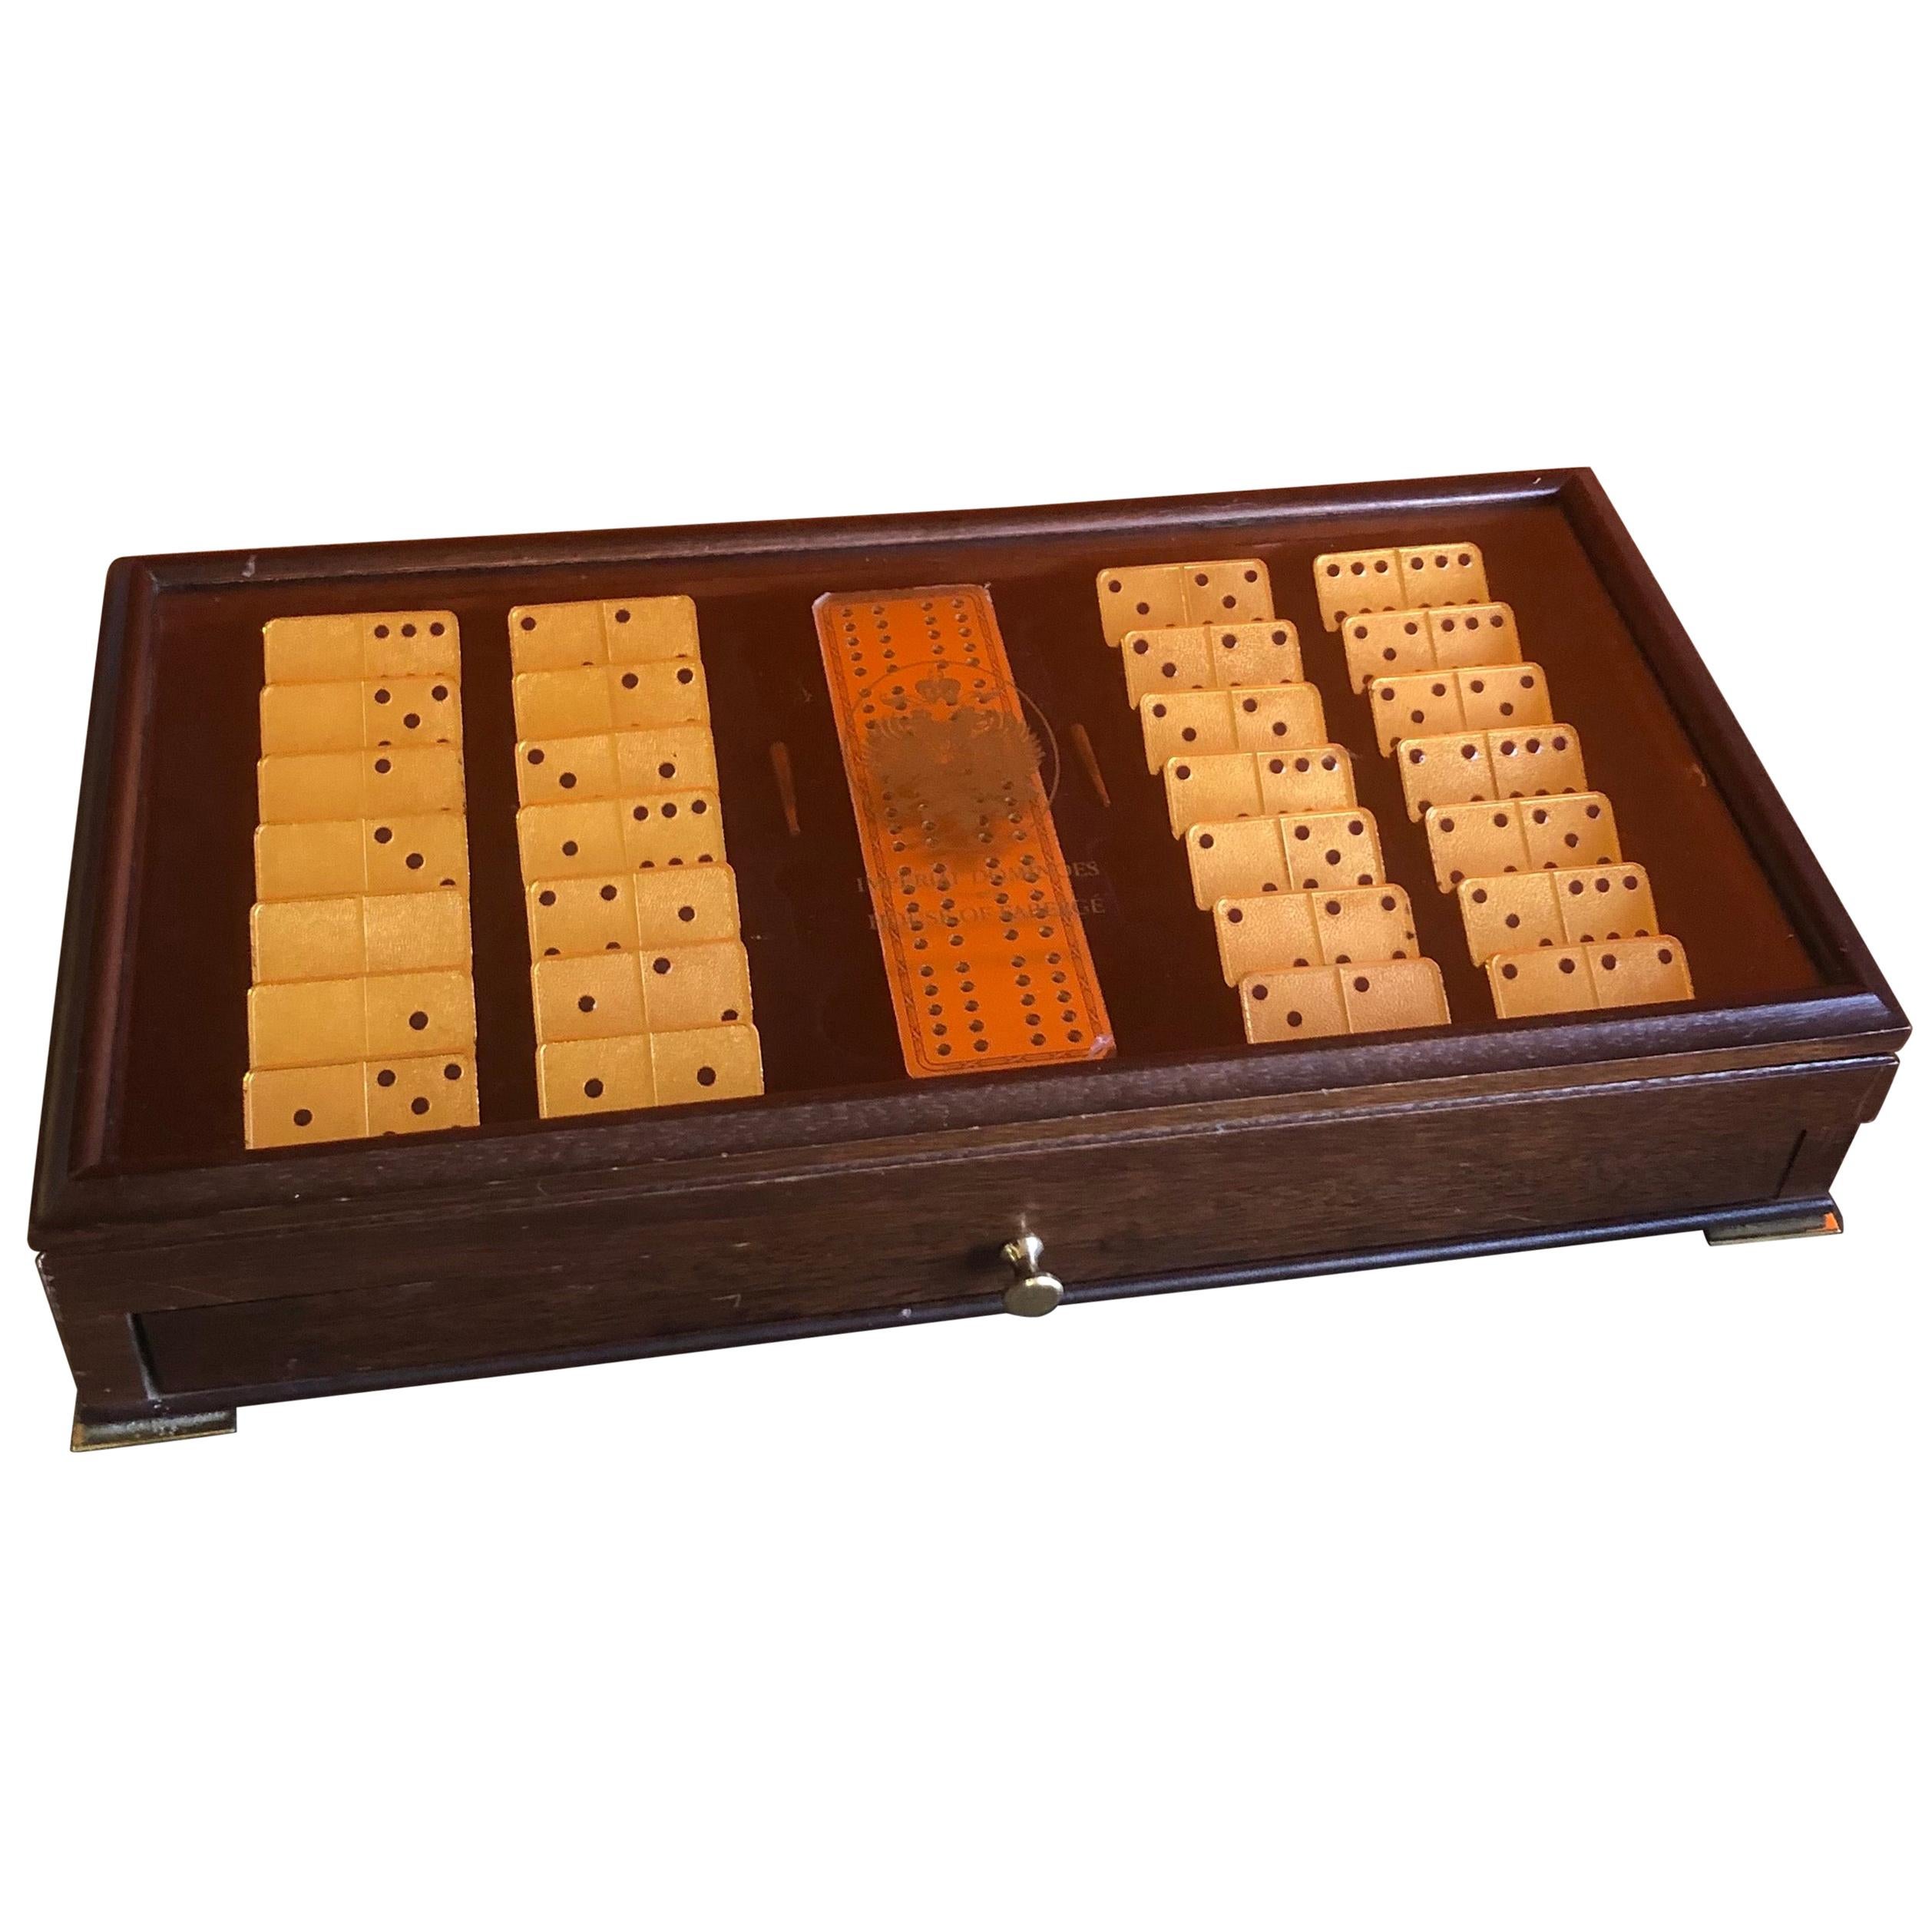 The House of Faberge 22-Karat Gold-Plated Imperial Domino Set and Case